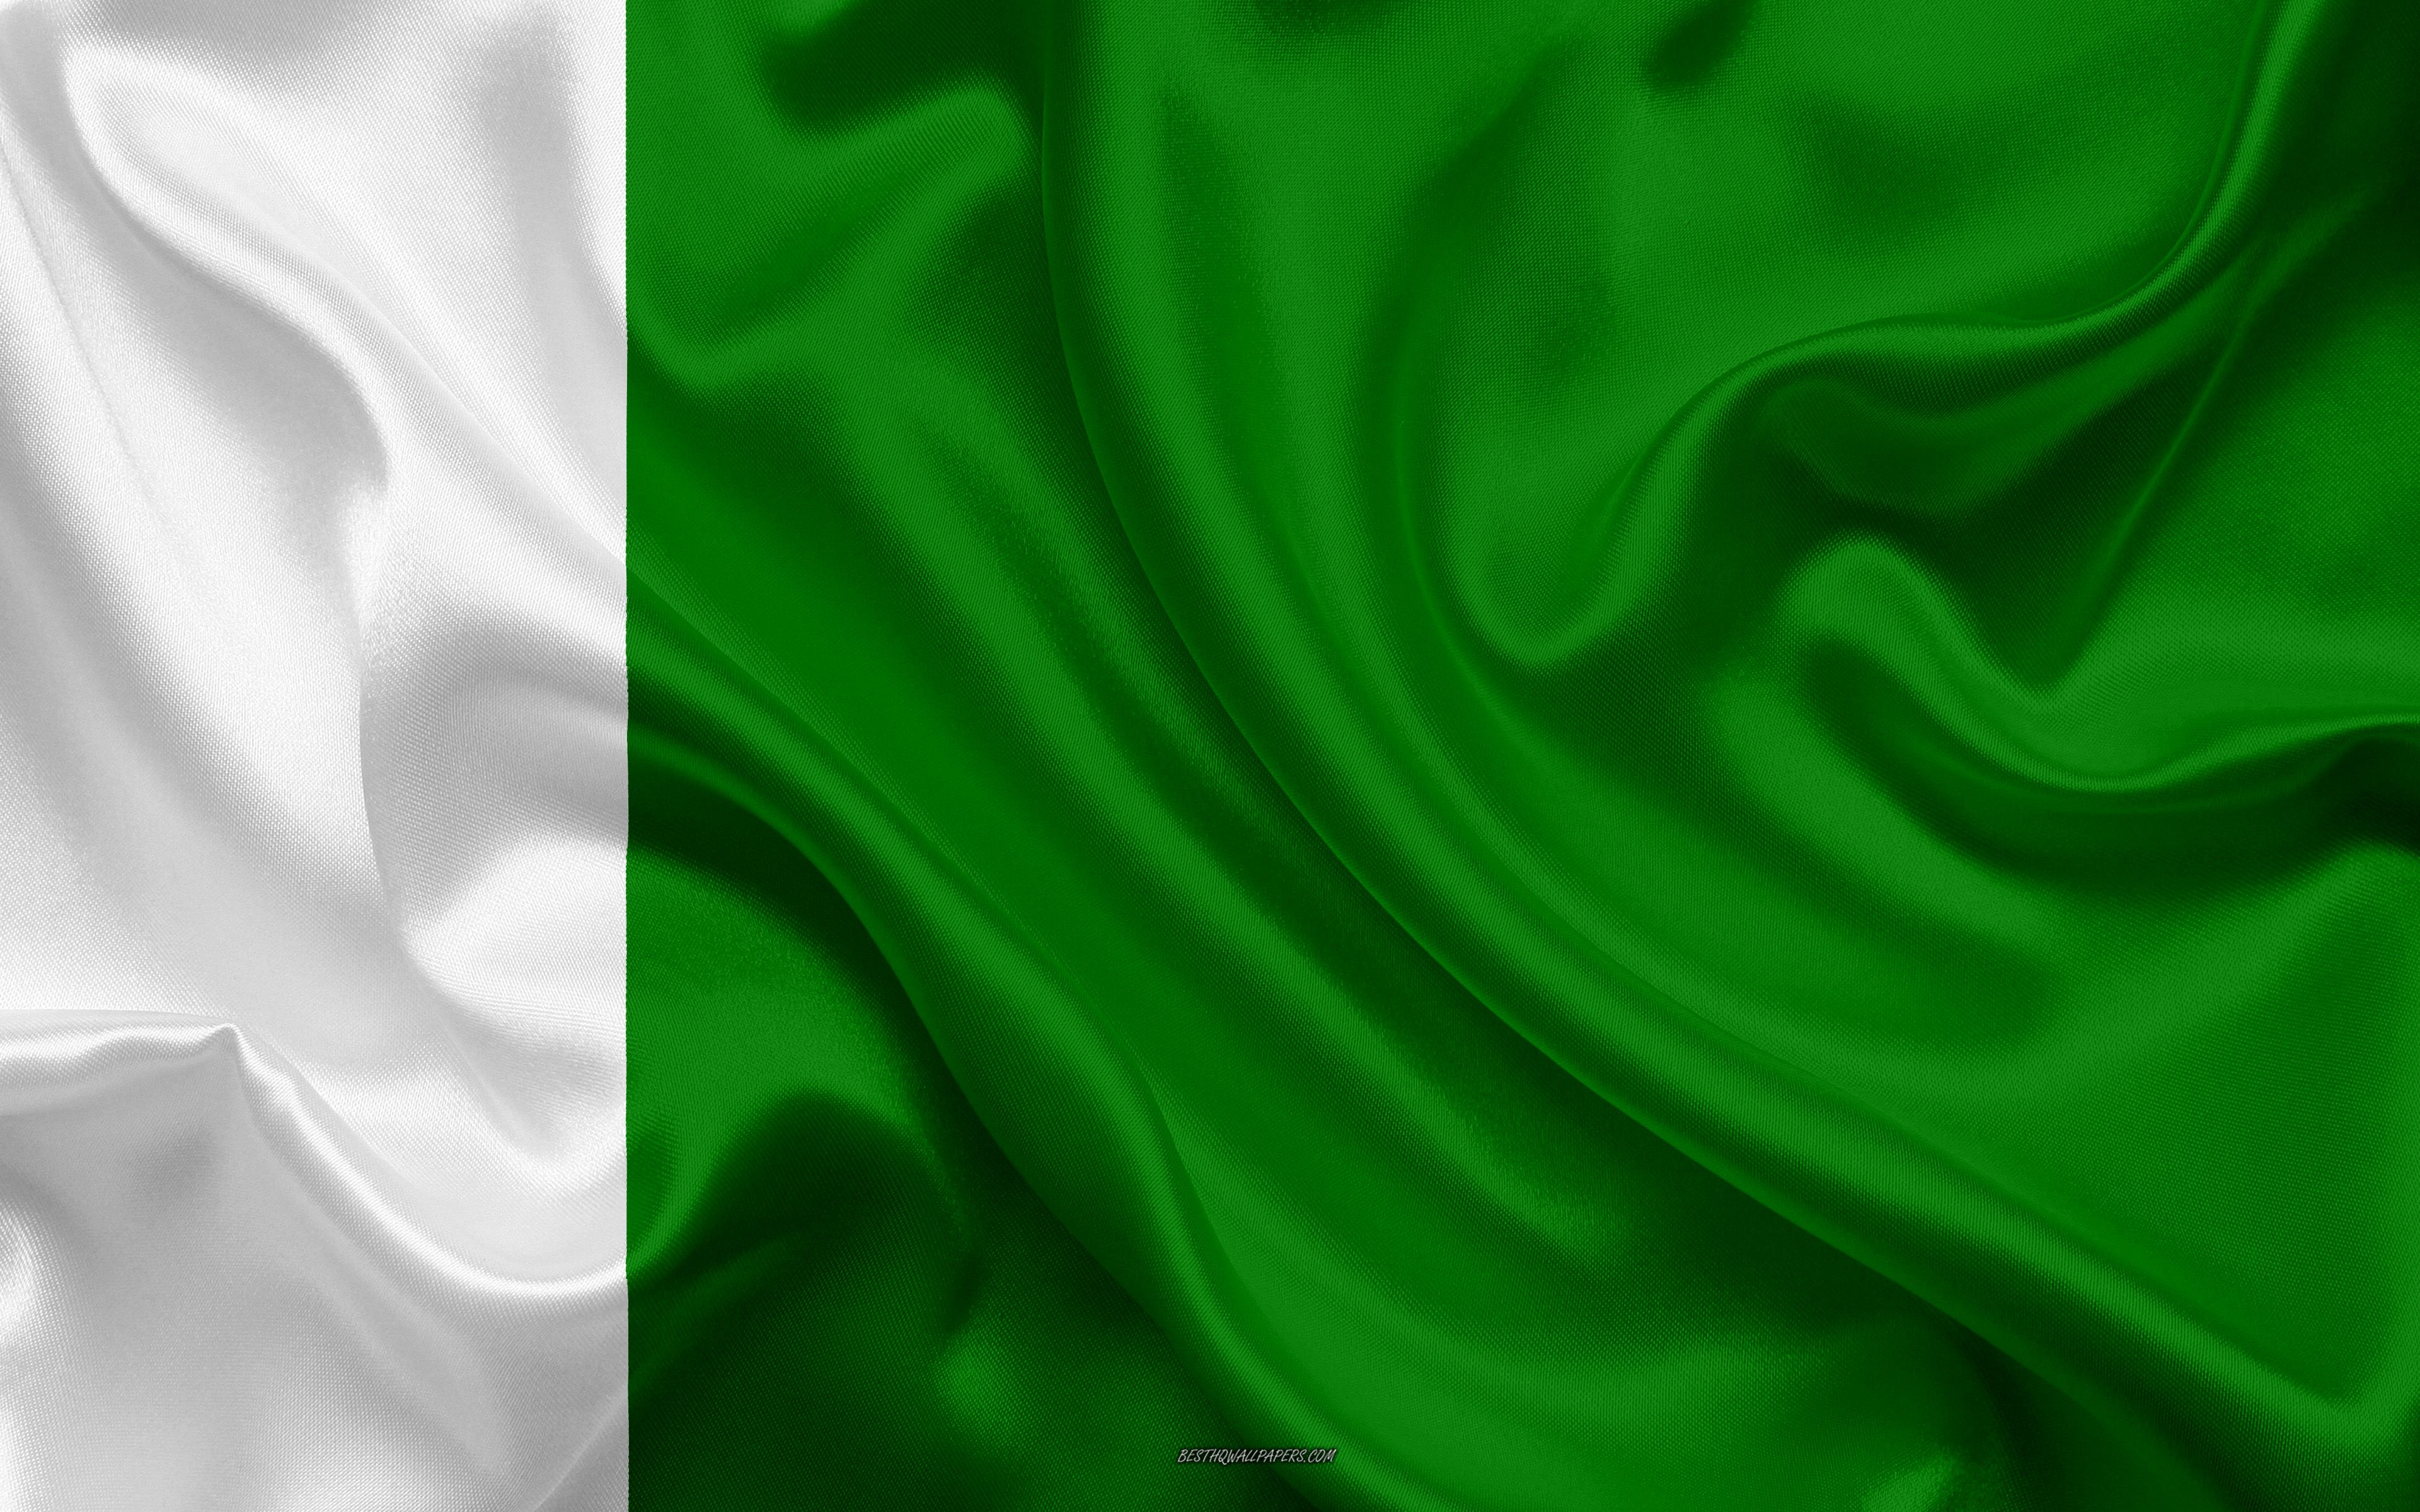 Download wallpaper Flag of Manama, 4k, silk texture, white green flag, Manama, Bahrain for desktop with resolution 3840x2400. High Quality HD picture wallpaper